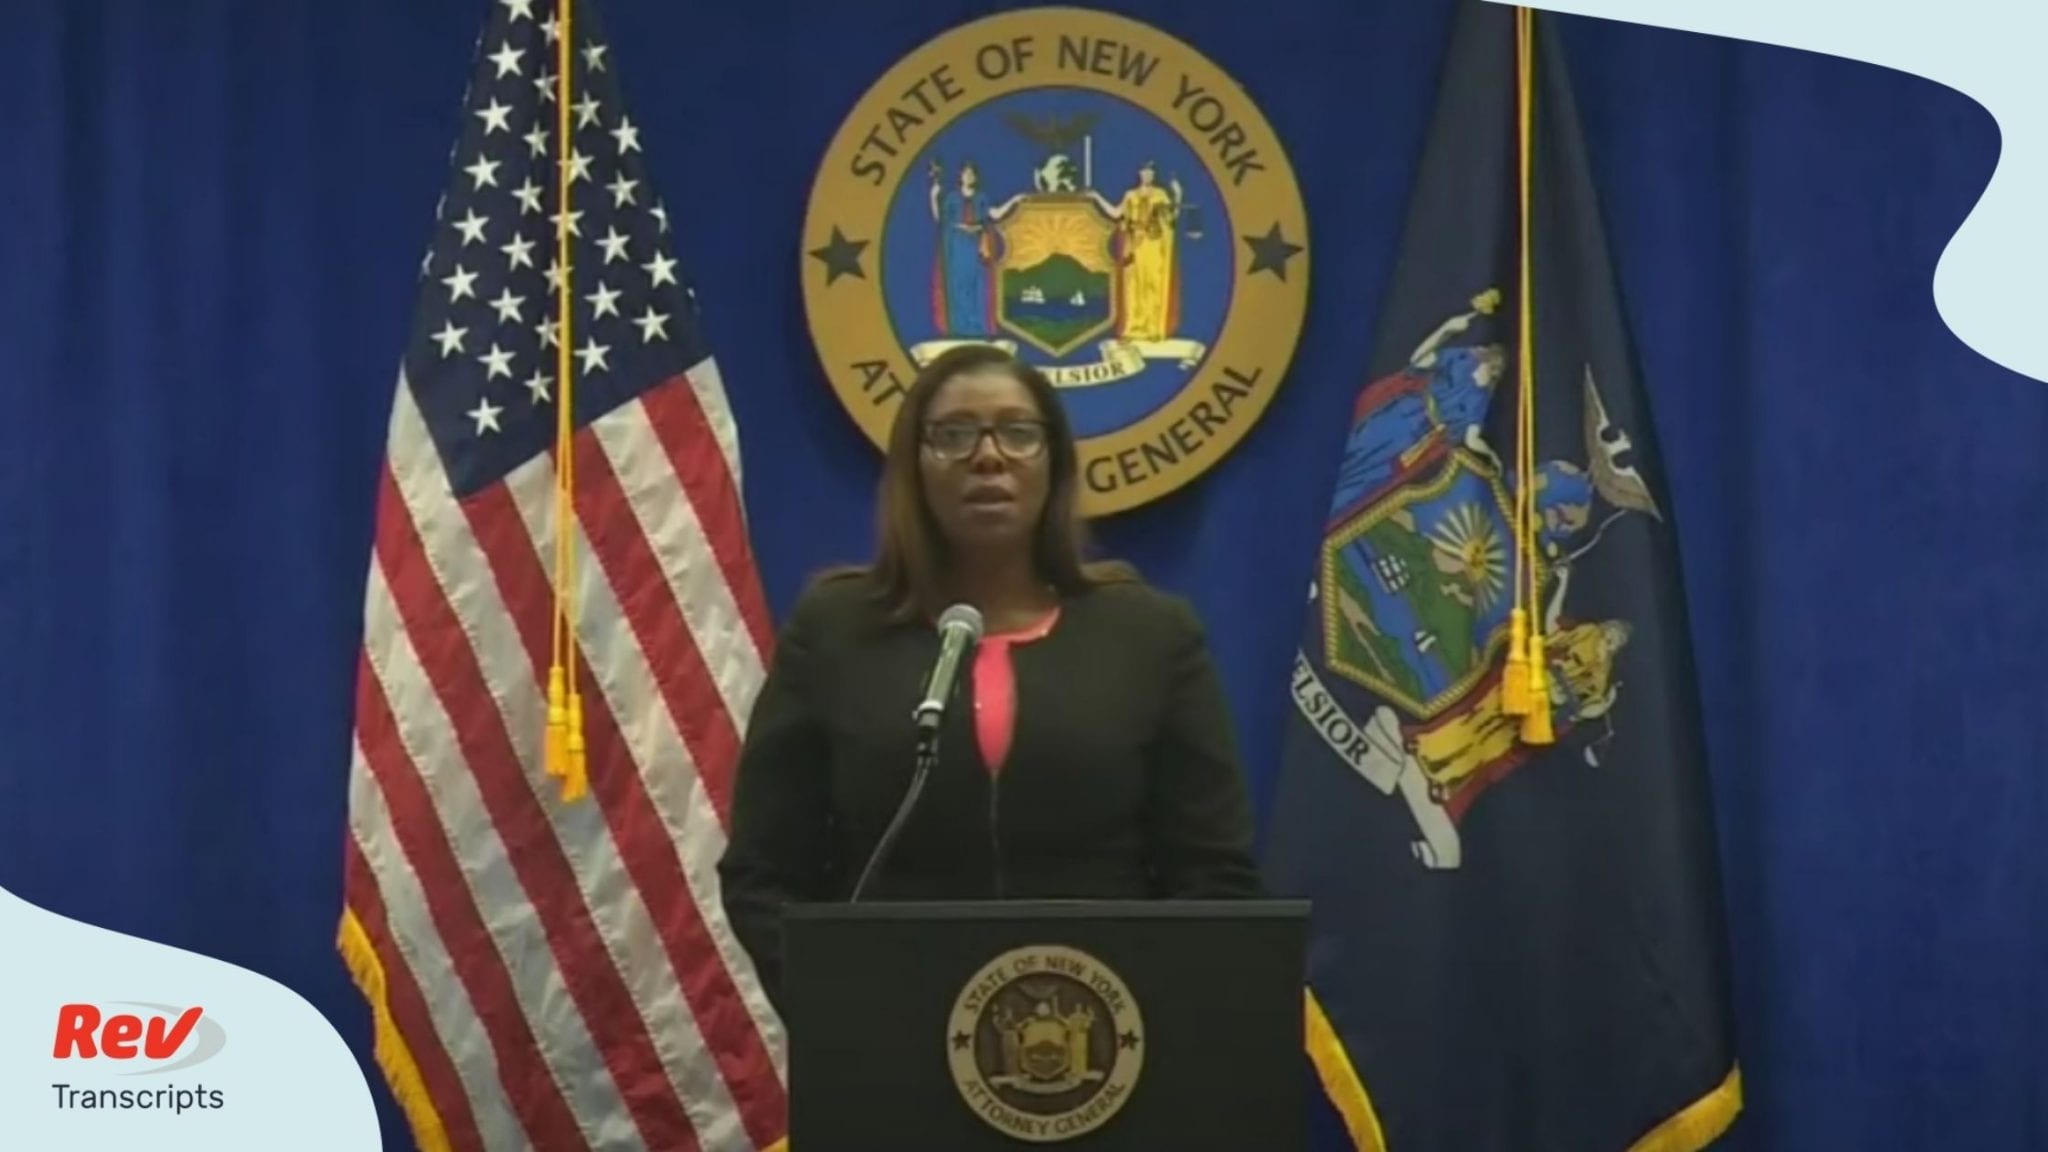 NY AG Letitia James Sues NRA Press Conference August 6